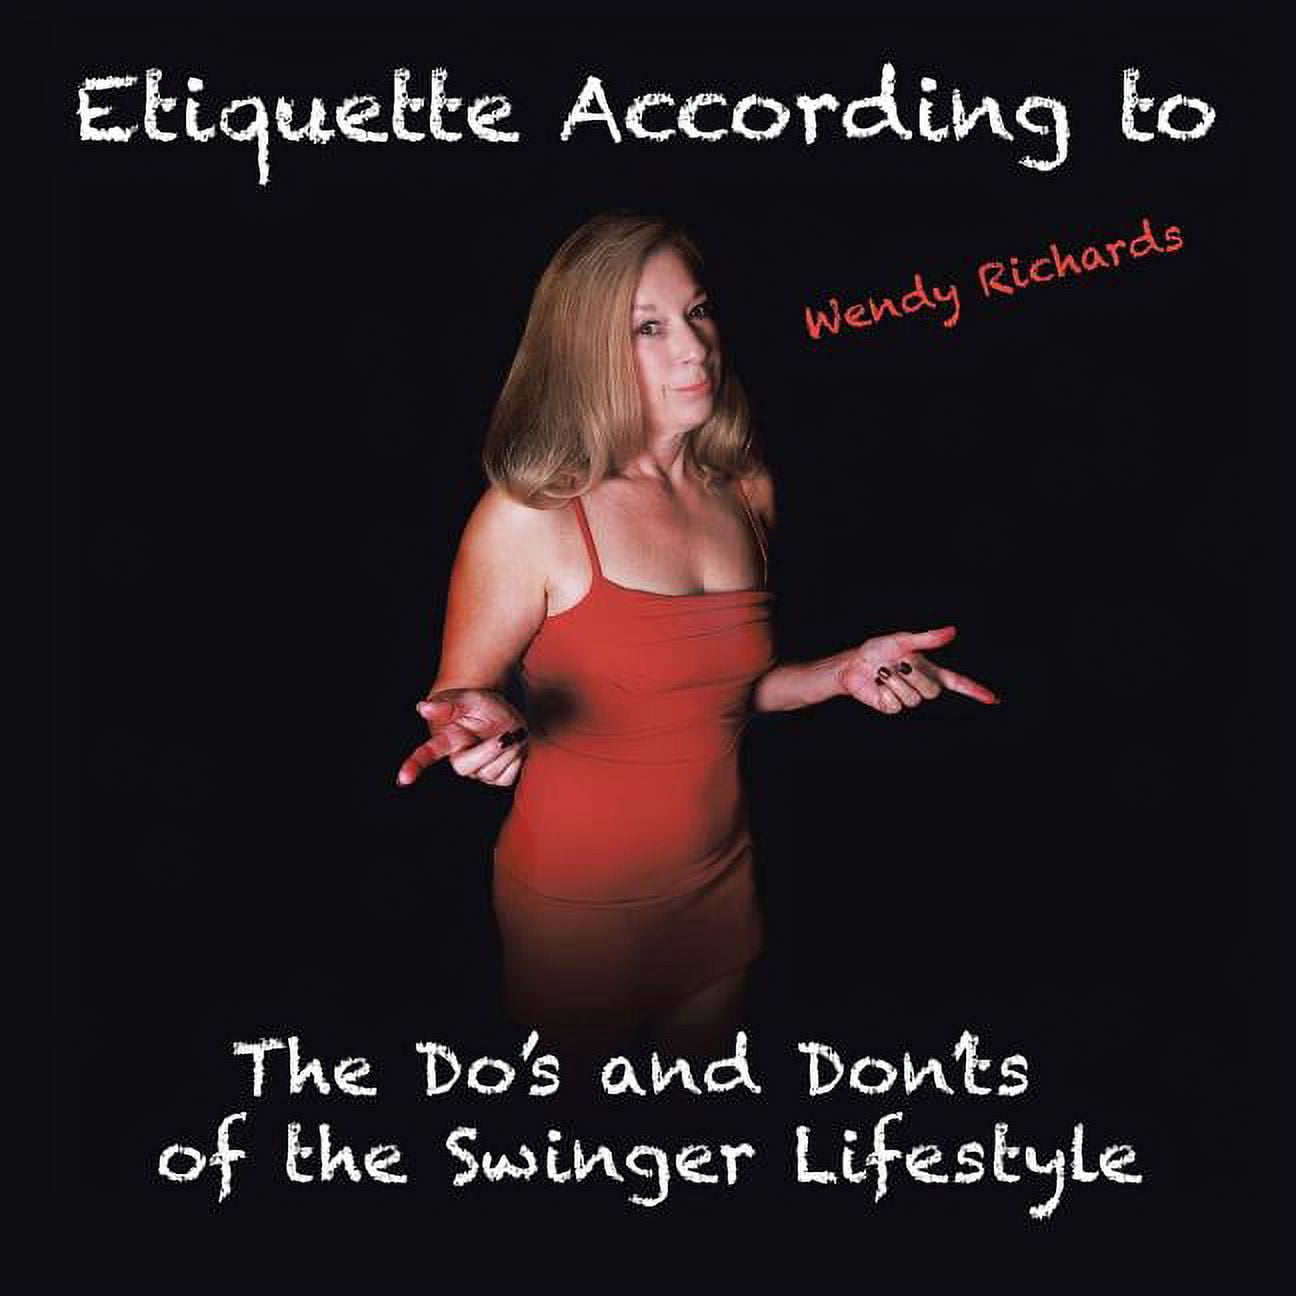 Etiquette According to Wendy Richards The Dos and Donts of the Swinger Lifestyle (Paperback) image